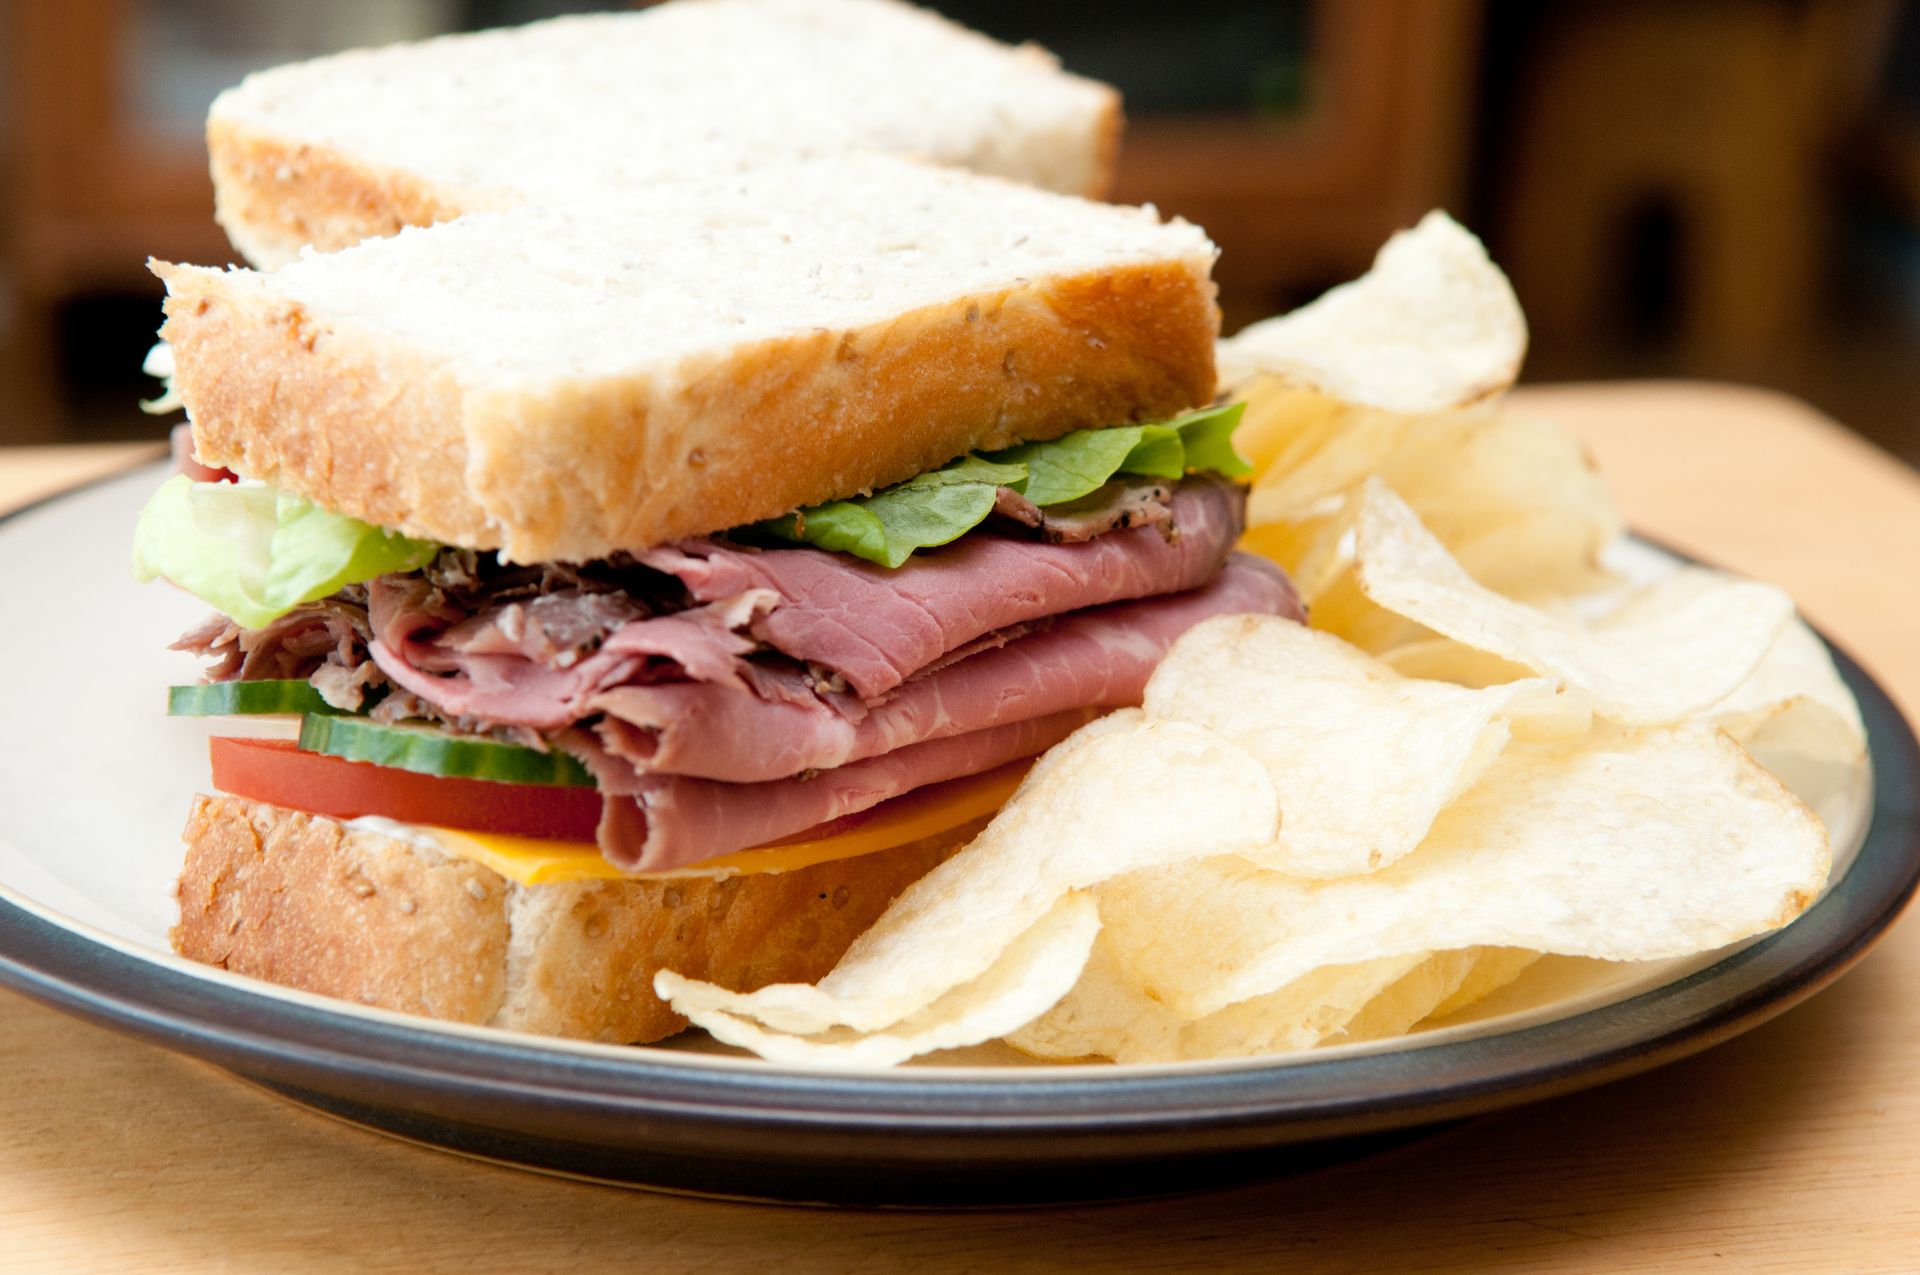 Photo of a roast beef sandwich and potatoes chips on a plate.